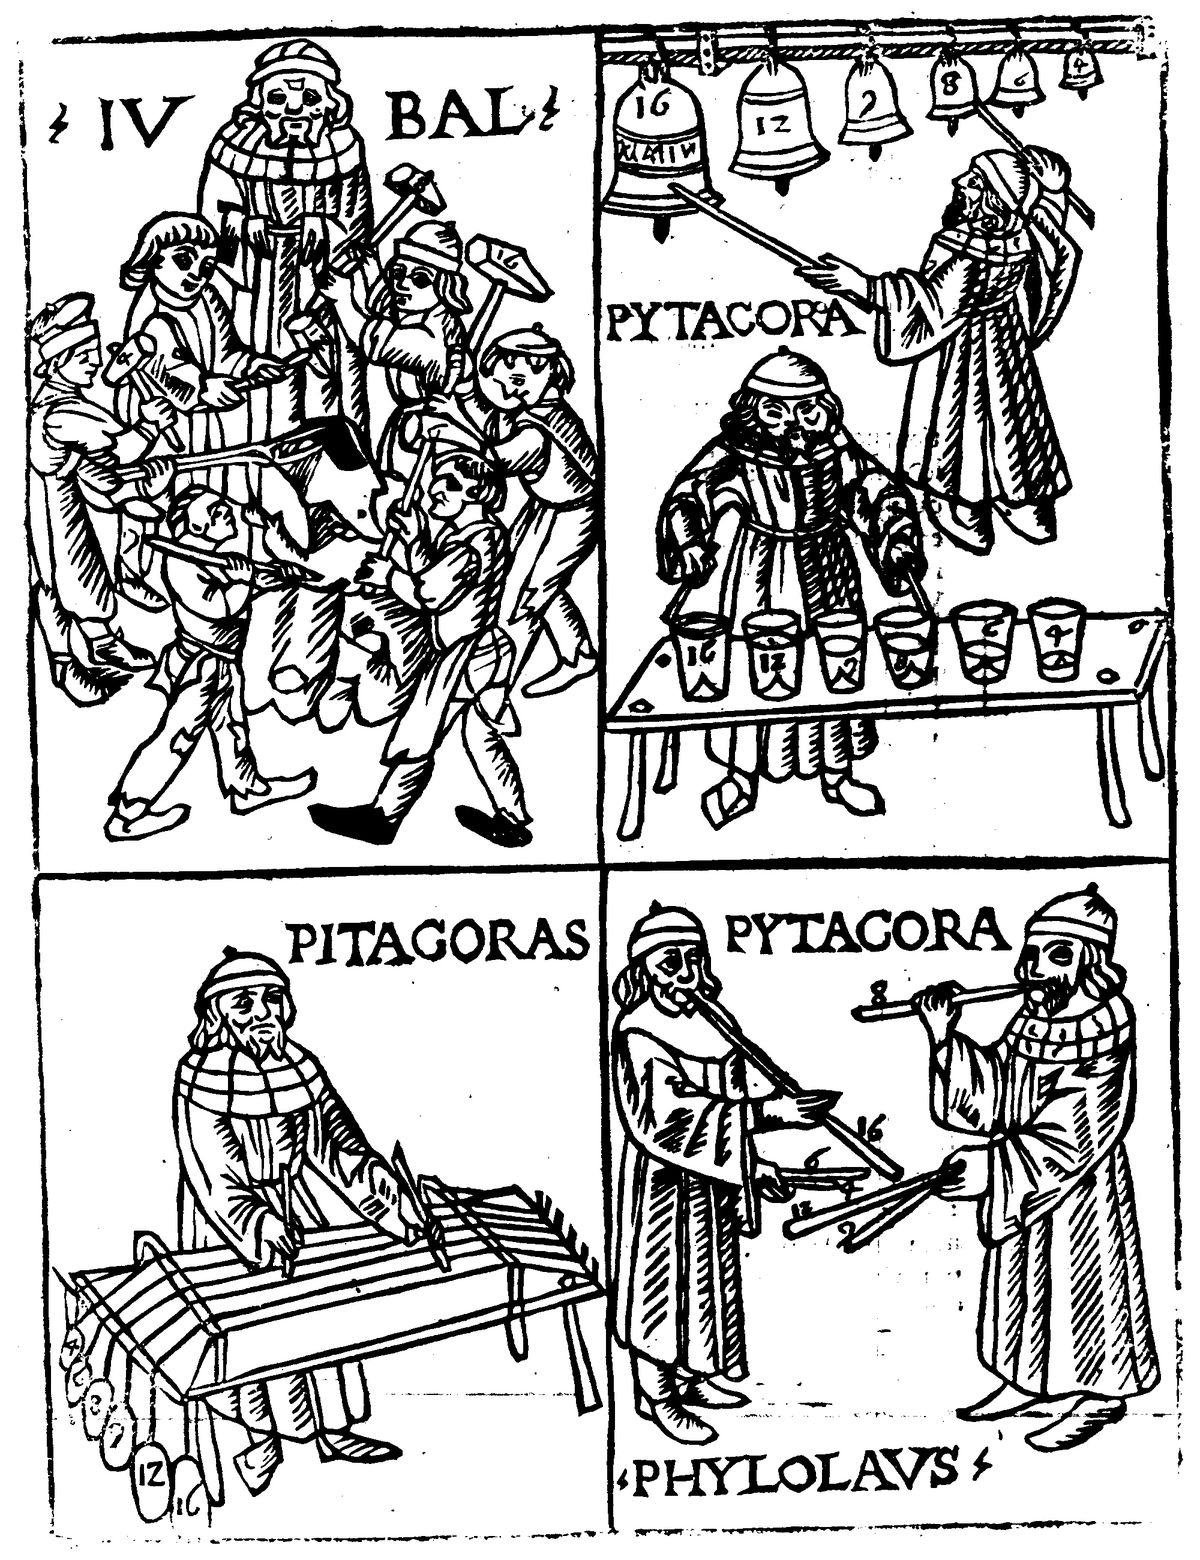 Woodcut showing Pythagoras with bells, a glass harmonica, a monochord, and organ pipes, from&nbsp;Theorica musicae&nbsp;by Franchino Gaffurio, 1492